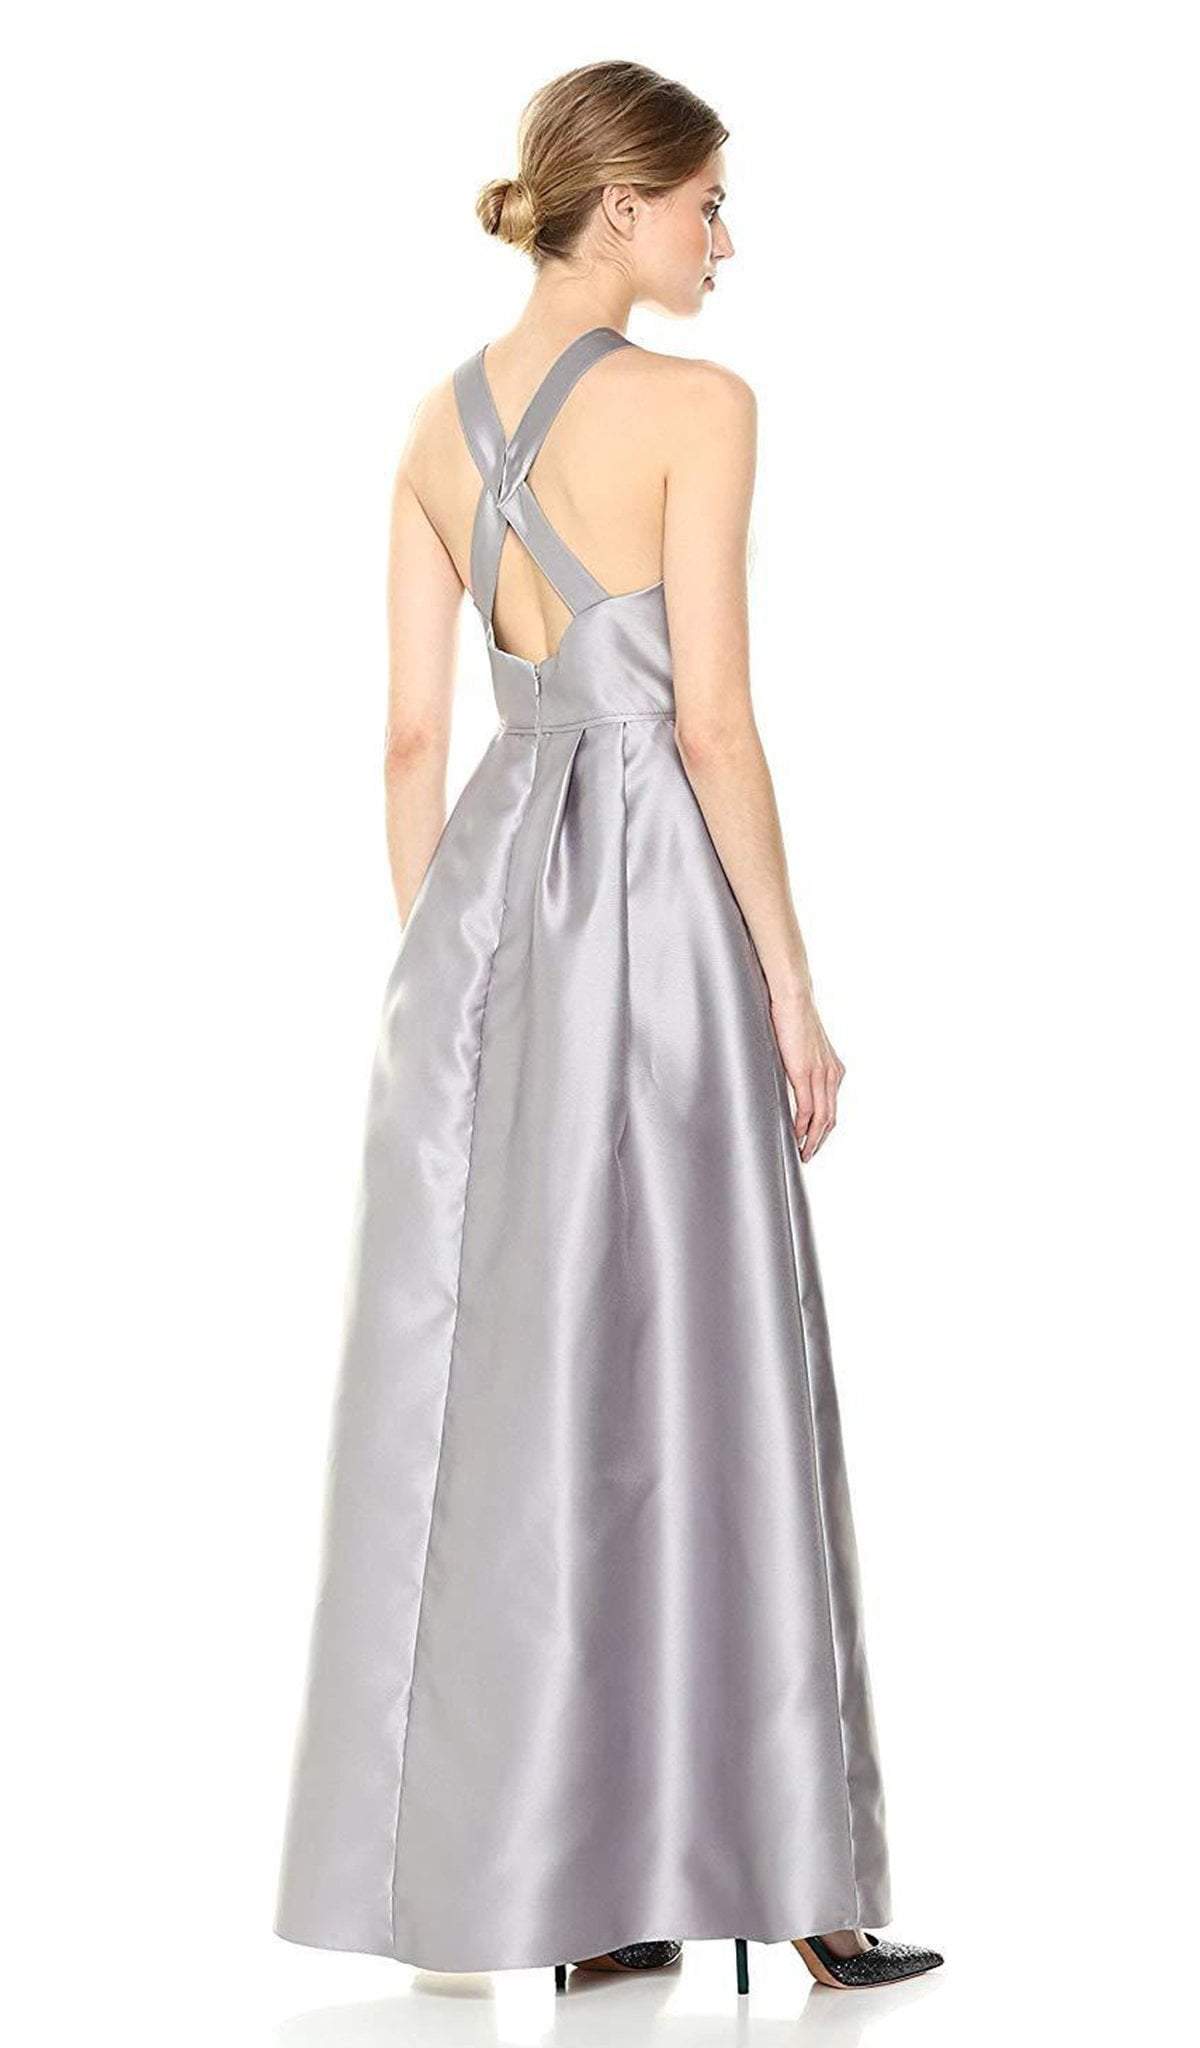 Adrianna Papell - AP1E203176 Embellished Halter Long A-line Dress In Silver